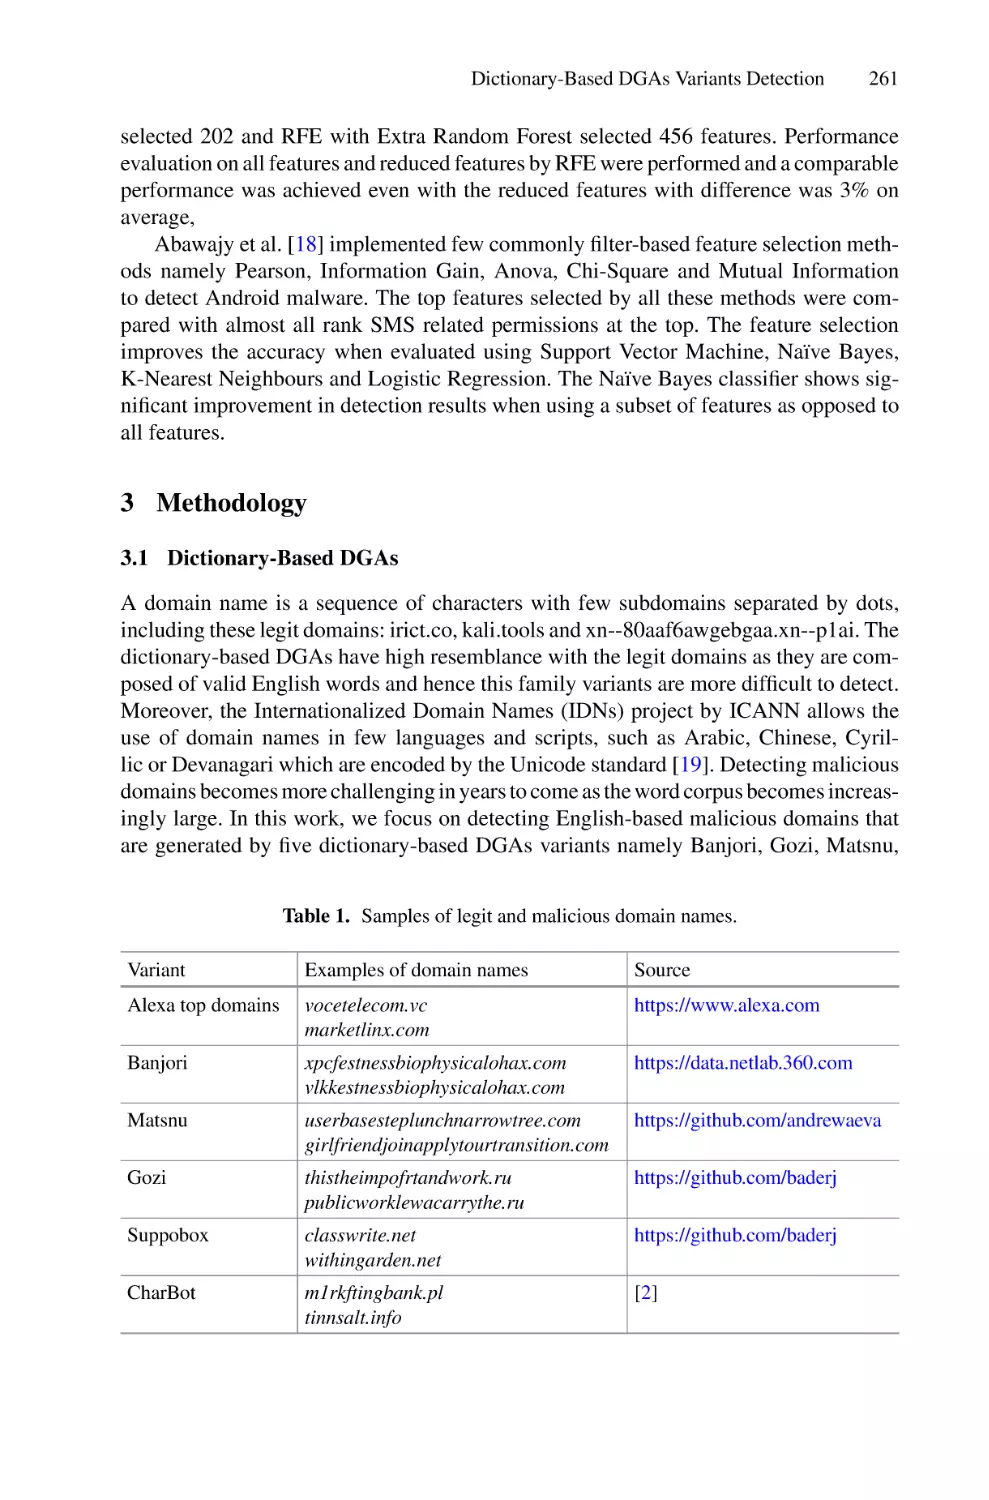 3 Methodology
3.1 Dictionary-Based DGAs